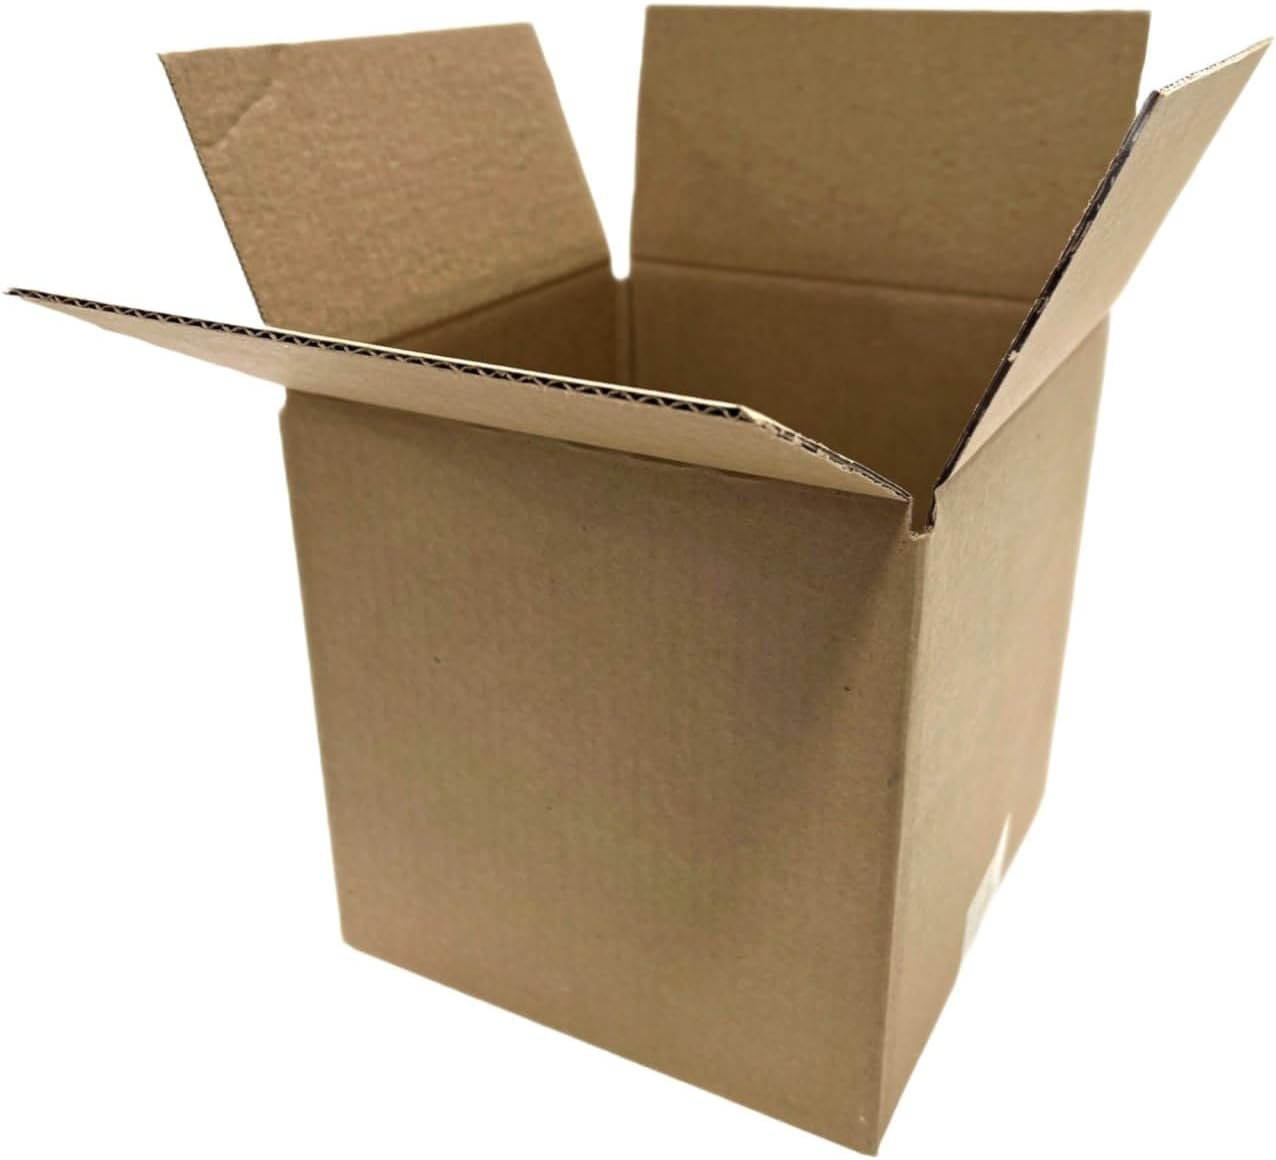 50 12x12x12 Cardboard Paper Boxes Mailing Packing Shipping Box Corrugated